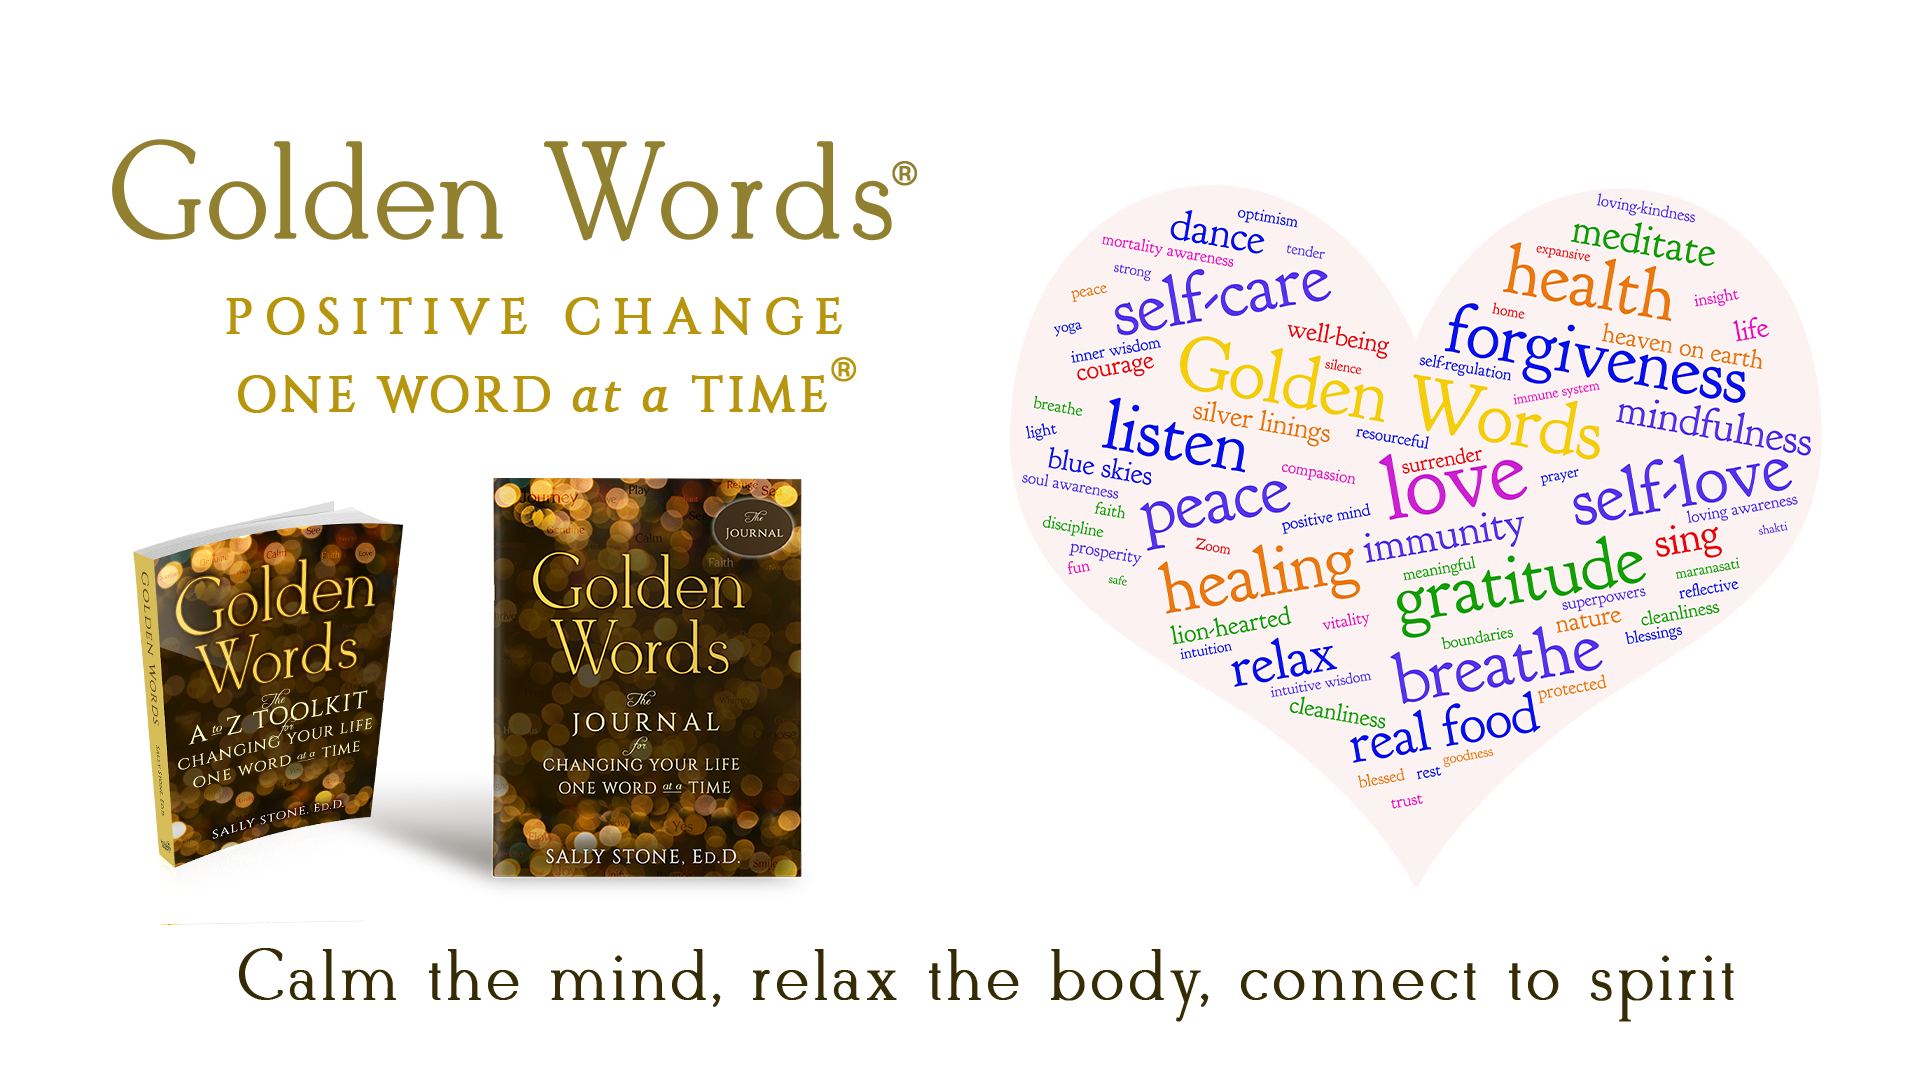 Golden Words, Positive Change One Word at a Time: Calm the mind, embody your spirit, walk your path